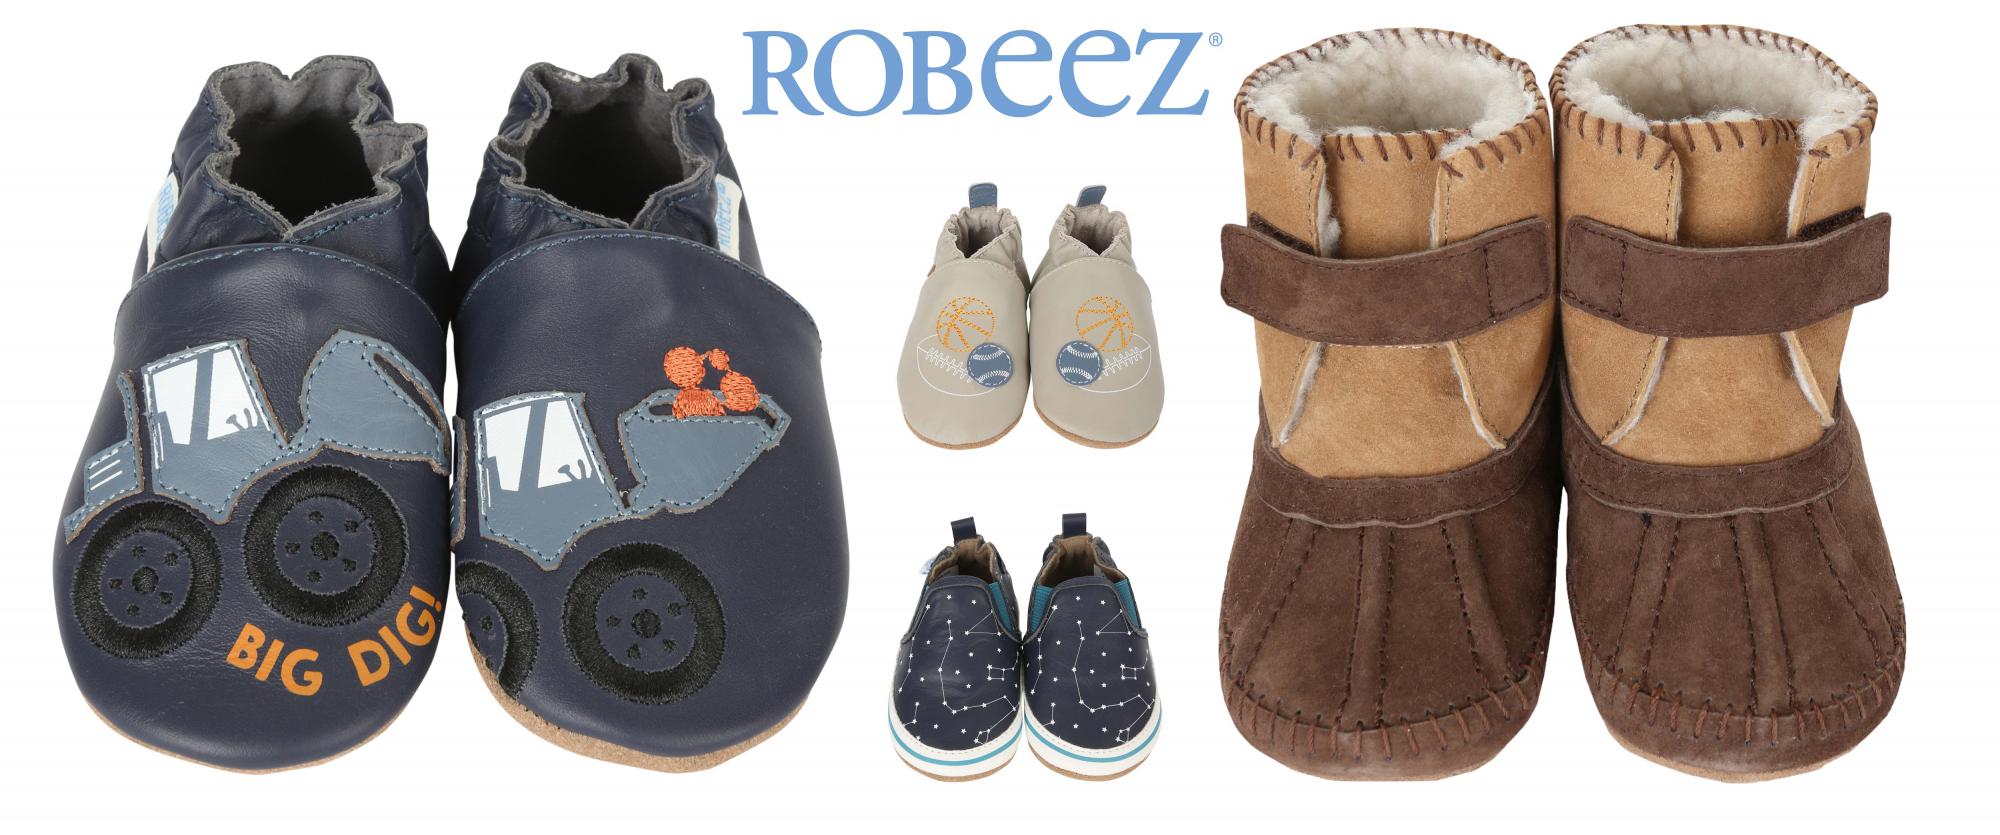 robeez rubber sole